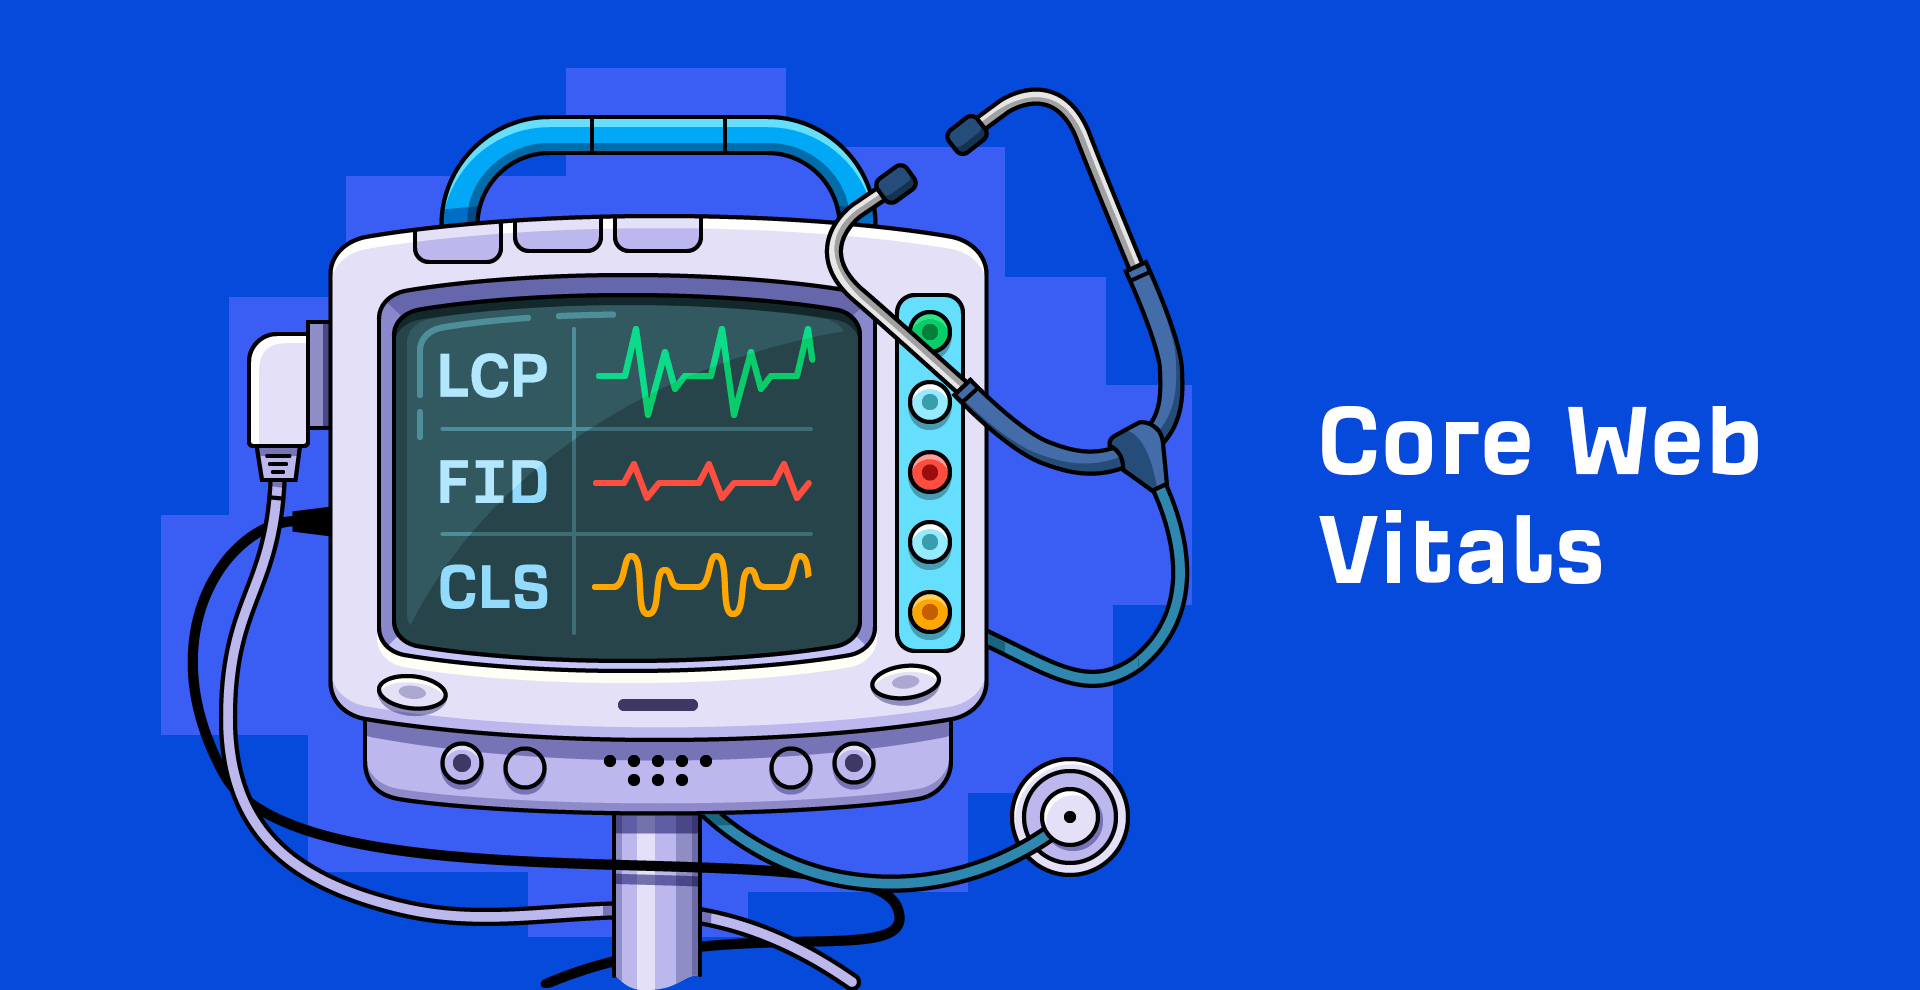 What Are Core Web Vitals & How Can You Improve Them?